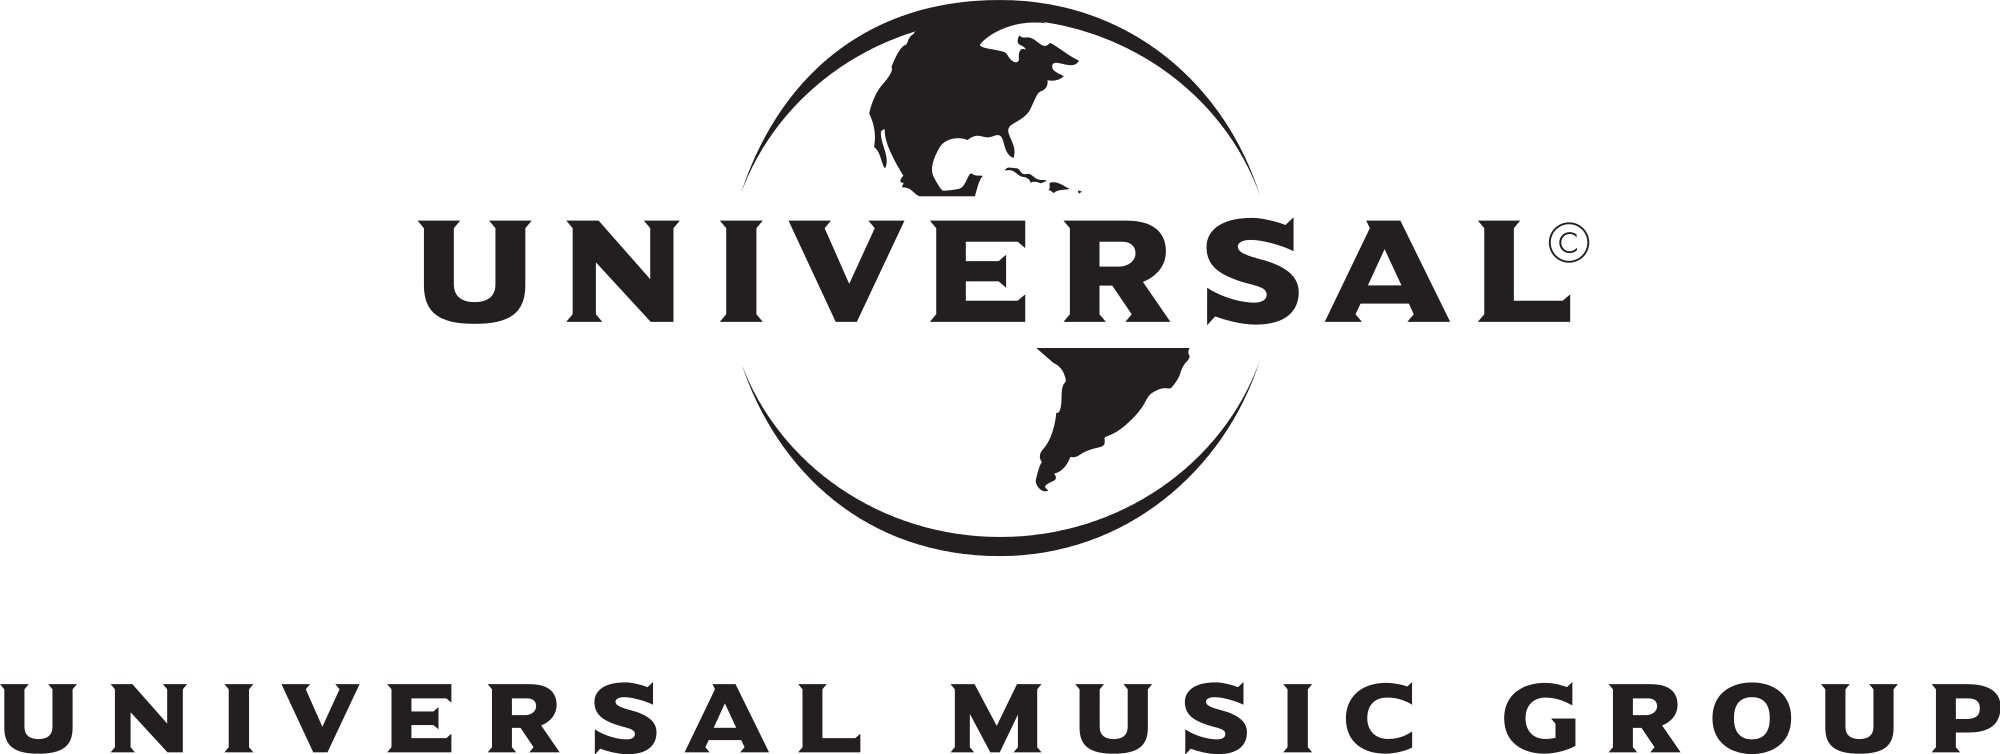 Universal Music Group The World S Leading Music Company Home